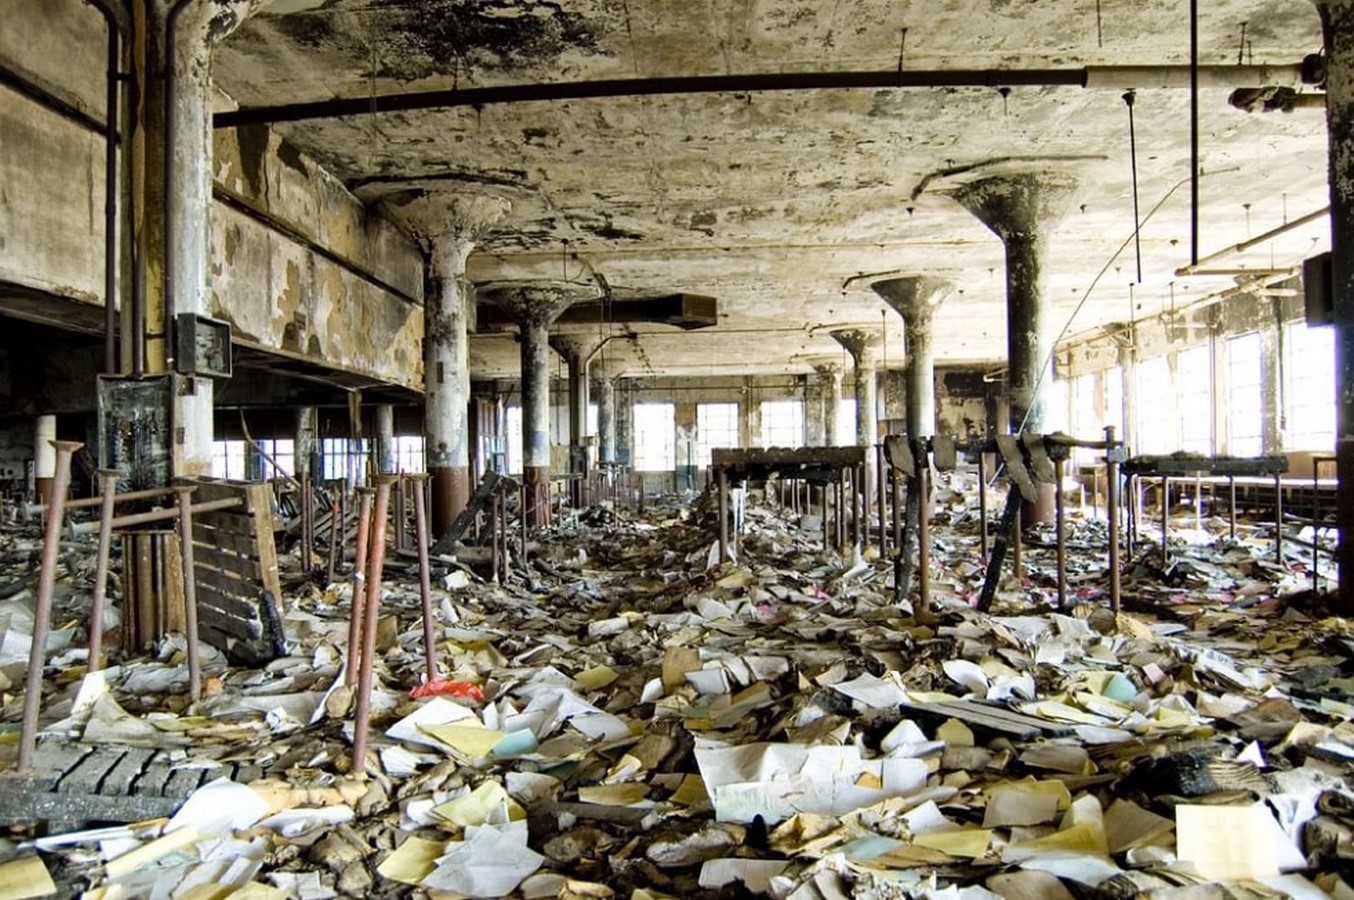 Abandoned Buildings In Detroit: 10 Buildings Every Architect Must See - Sheet24